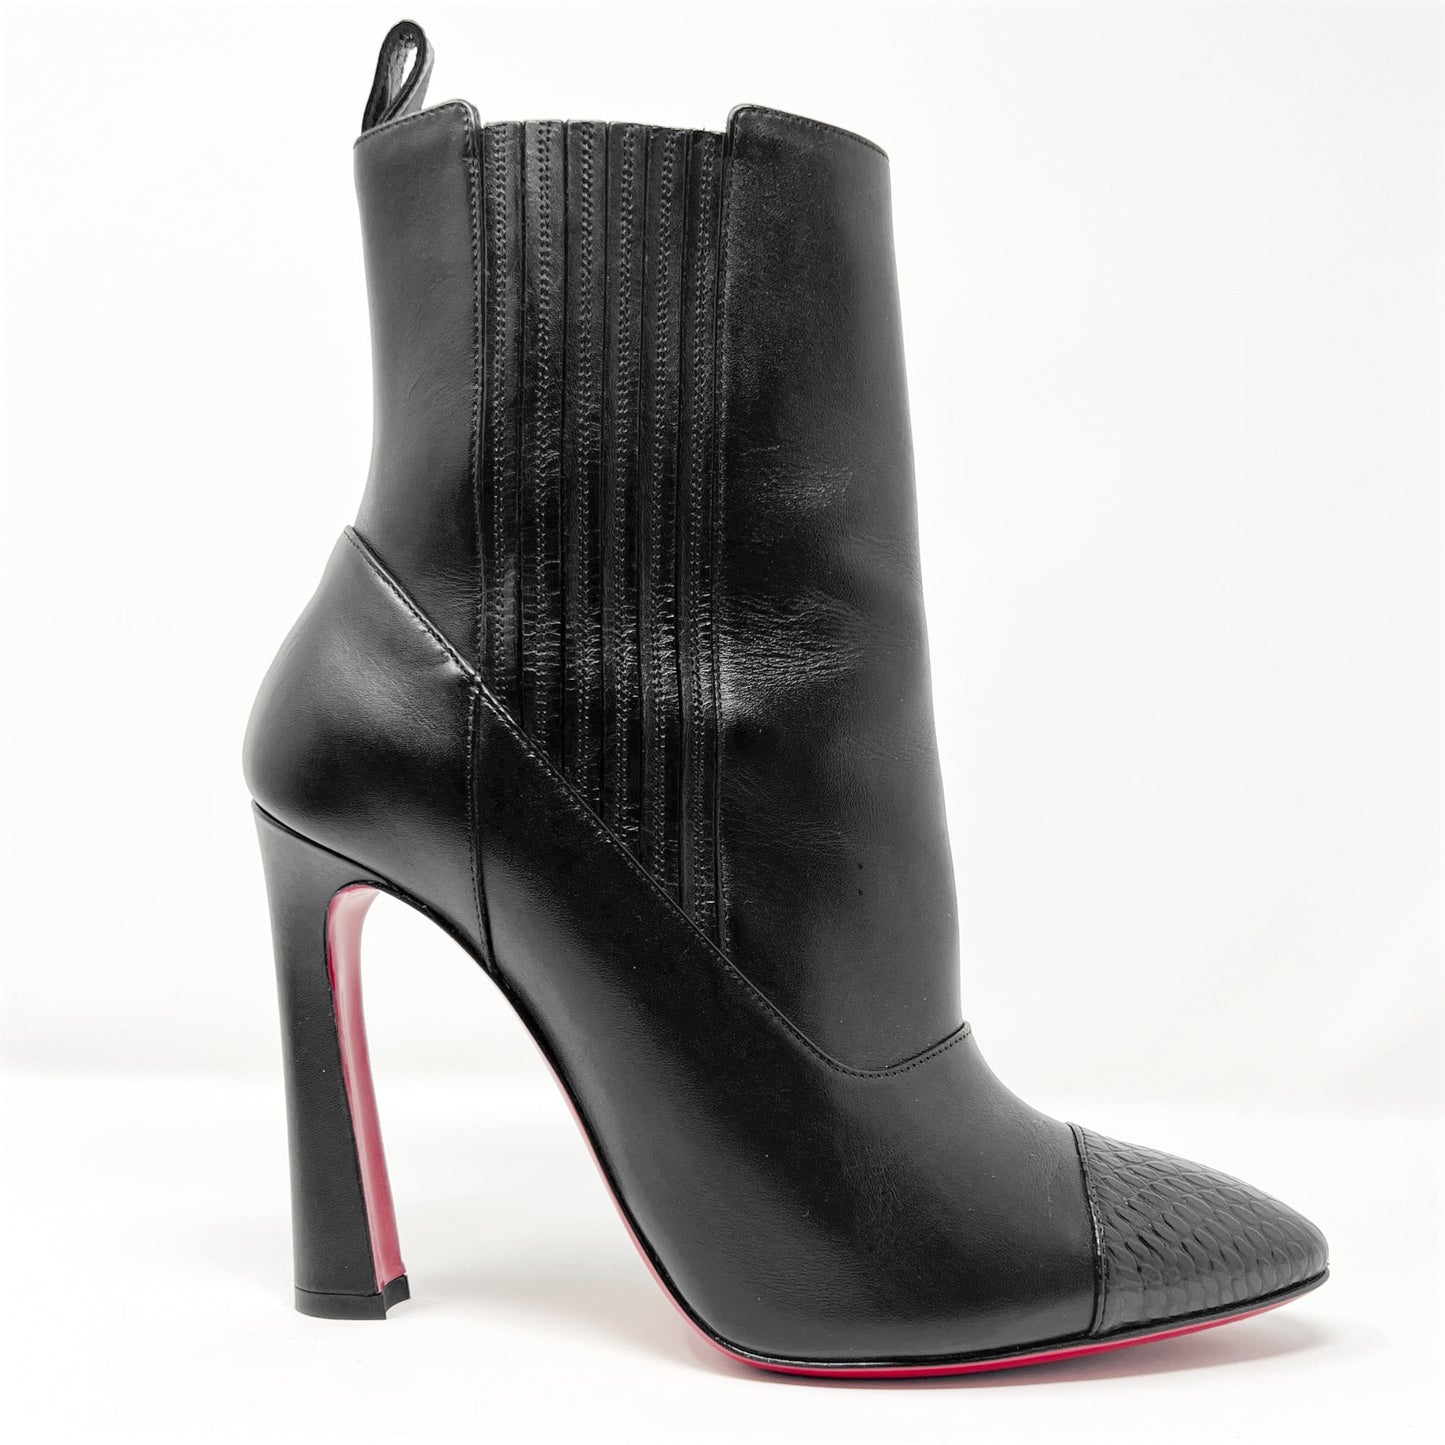 Christian Louboutin Me in the 90's 100 Black Leather Calf High Heels Boots Size EU 37.5